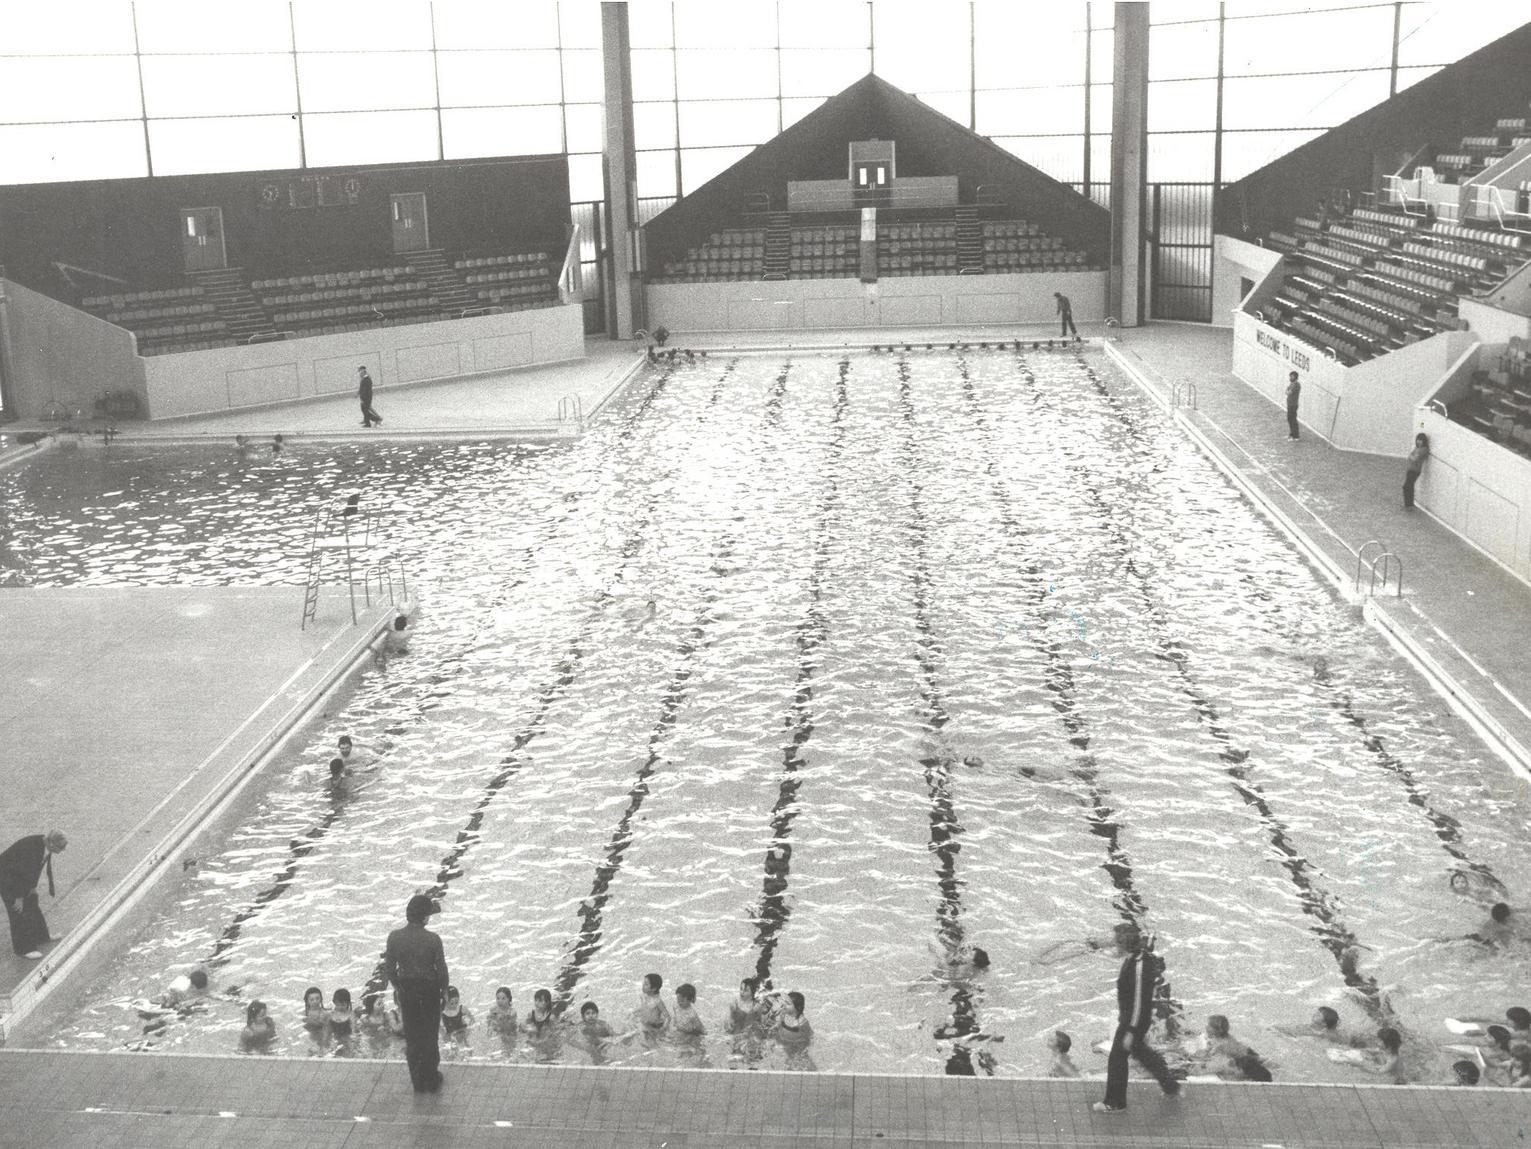 By the end of the 1970s the ruling Conservative councillors suggested selling the pool after it lost more than 400,000 pounds in a year.